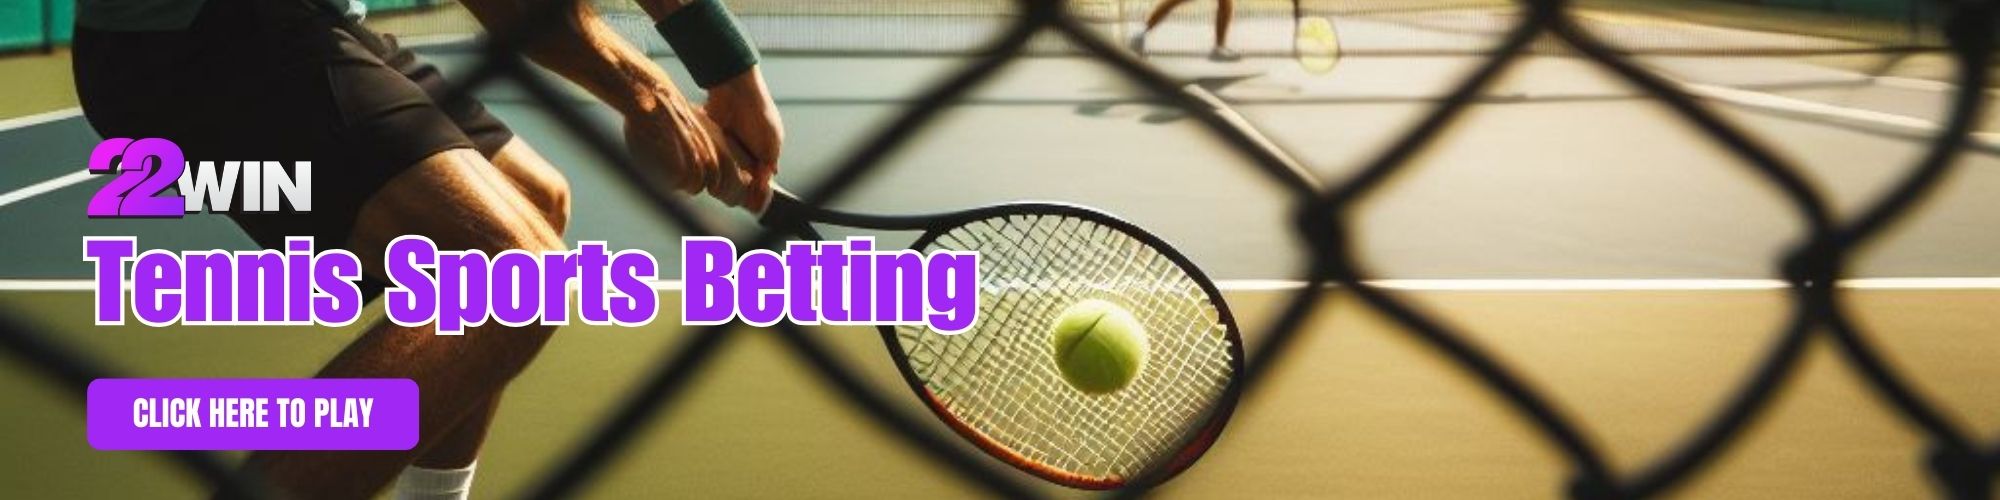 22Win Tennis Sports Betting in the Philippines